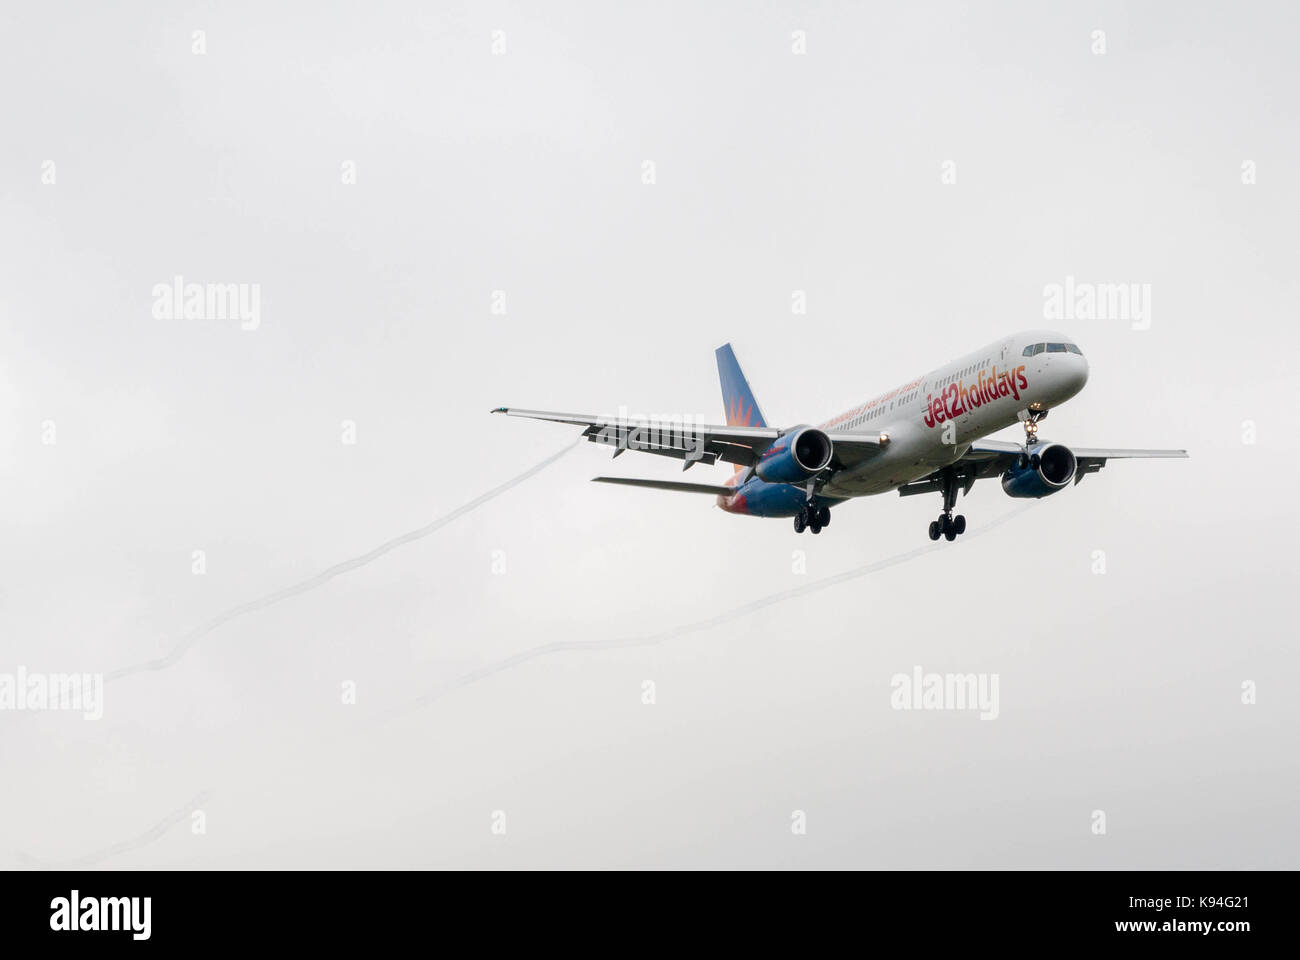 BOEING 757-236 aircraft, reg G-LSAD, operated by carrier Jet2, approaches Leeds/Bradford airport for landing. Stock Photo